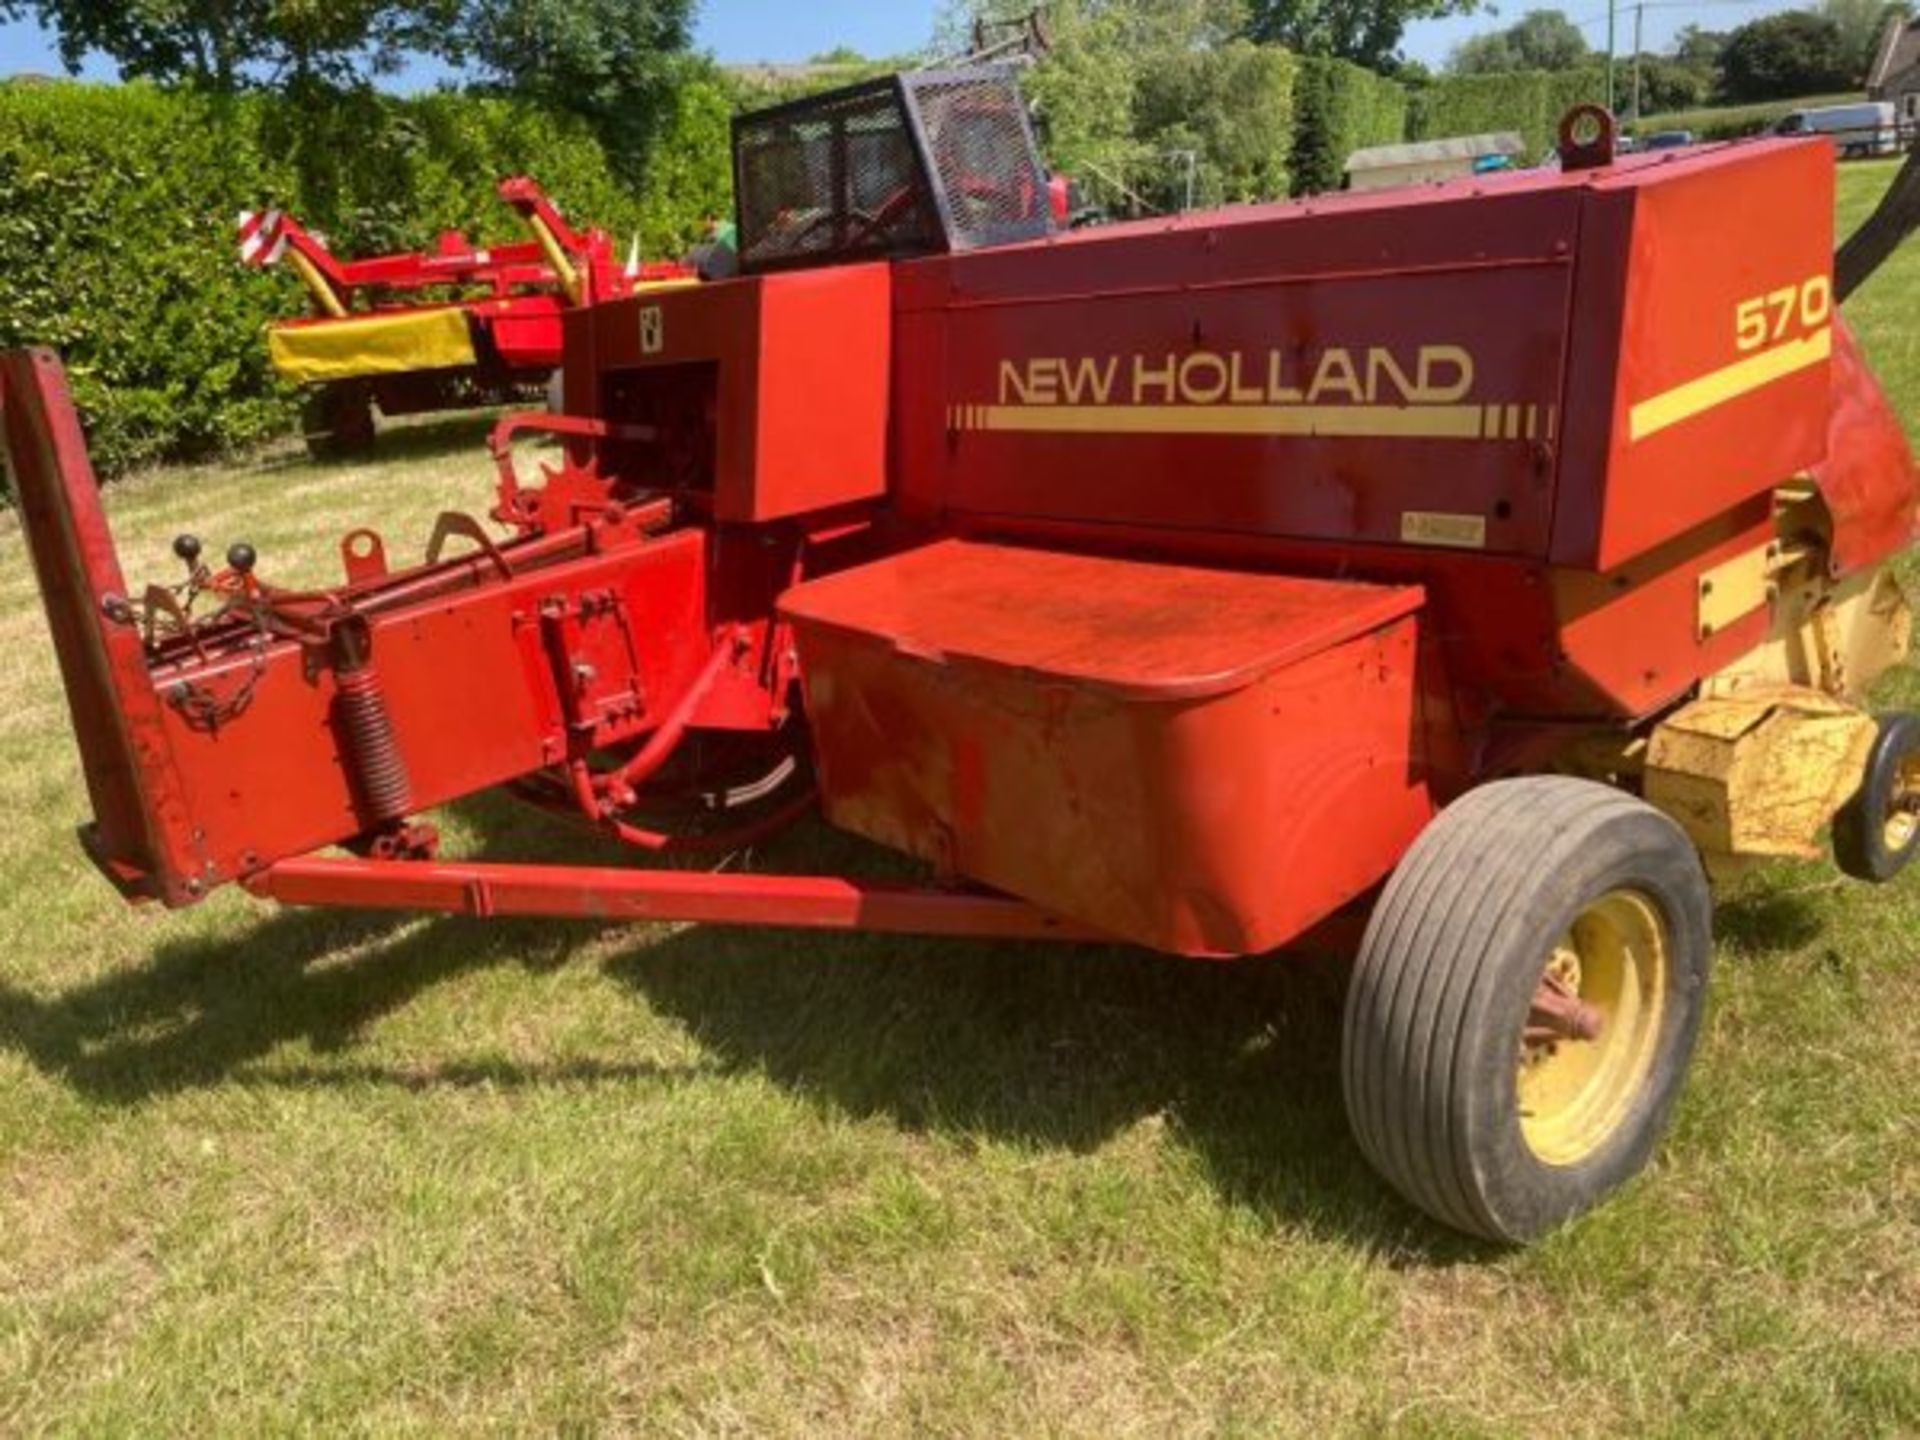 NEW HOLLAND 570 CONVENTIONAL BALER - Image 5 of 10